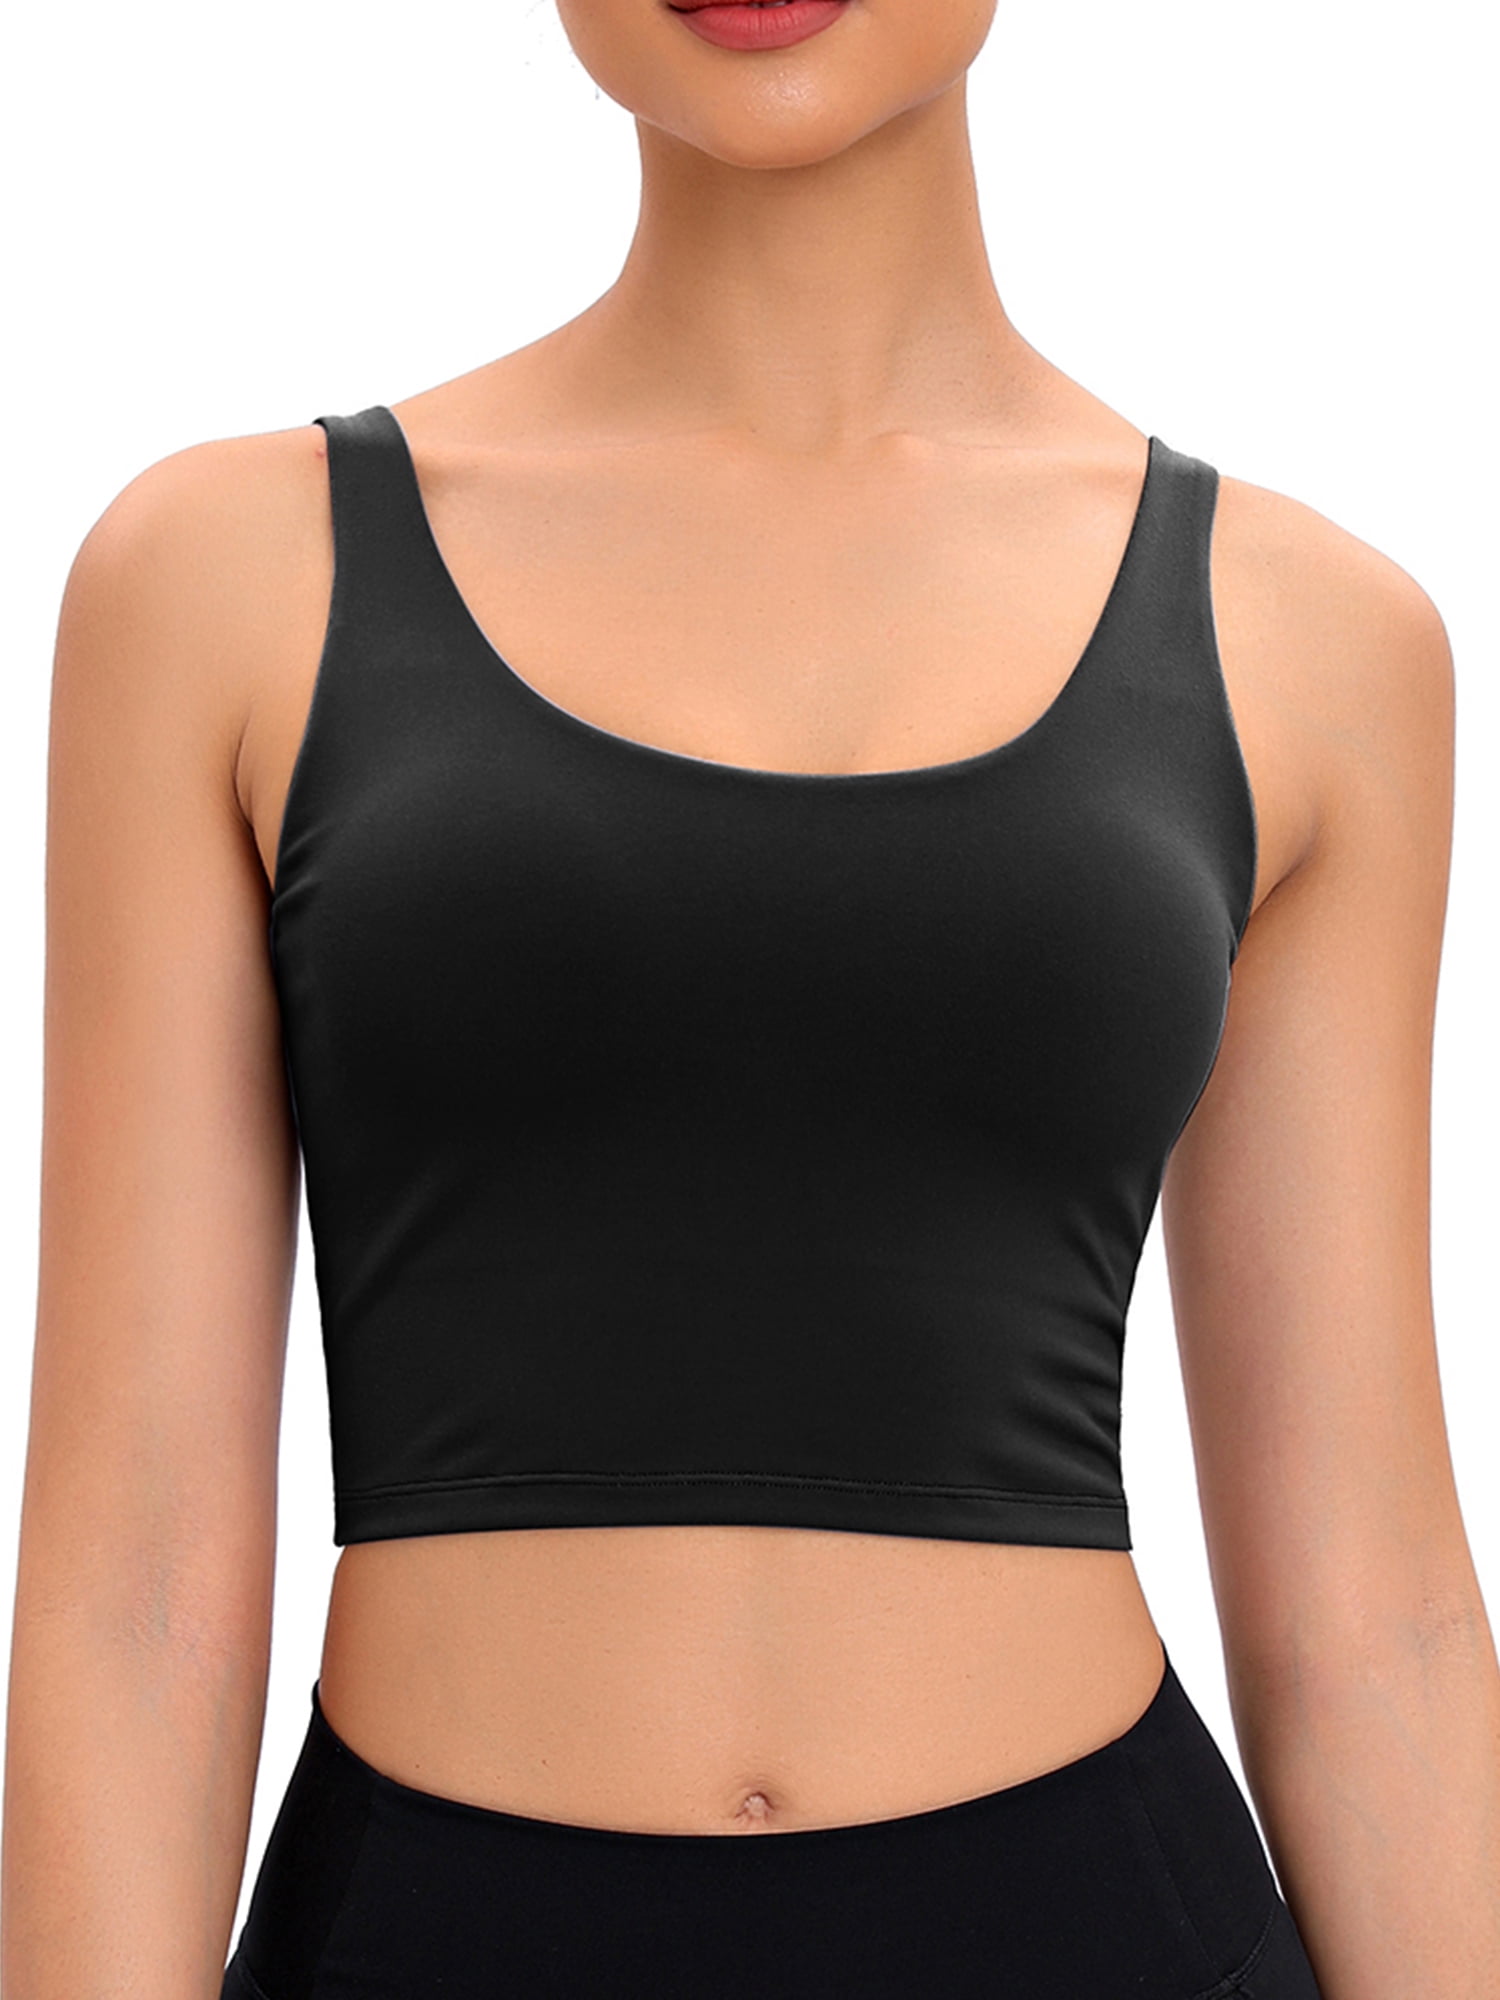 DISOLVE Sports Bra for Women Longline Padded Bra Gym Yoga Crop Tank Tops  Fitness Workout Running Top